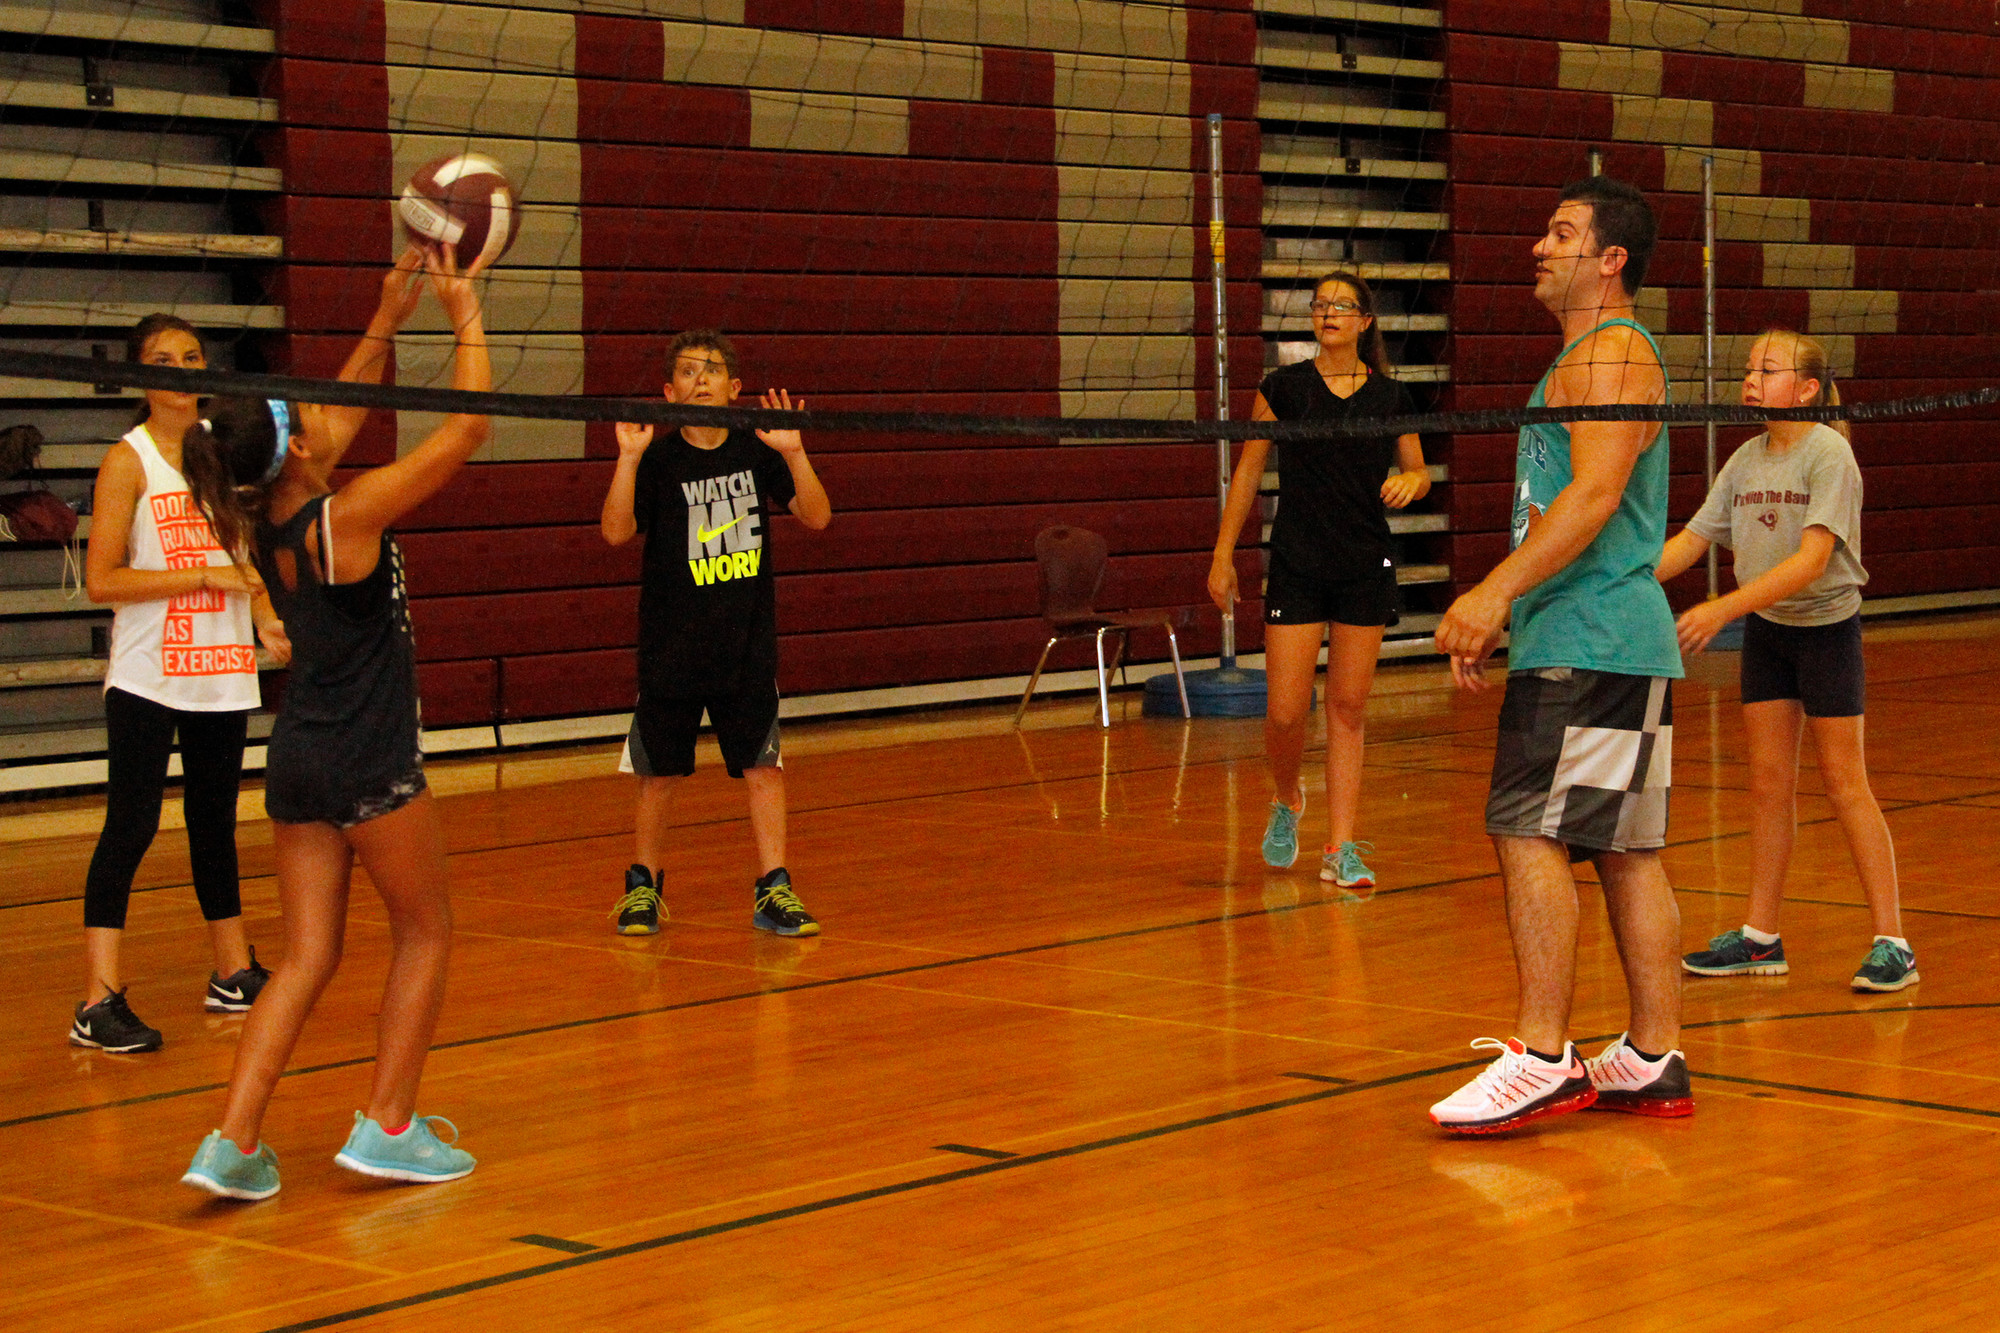 Volleyball coach Chris Tracarico, far right, showed students the proper form for hitting the ball.